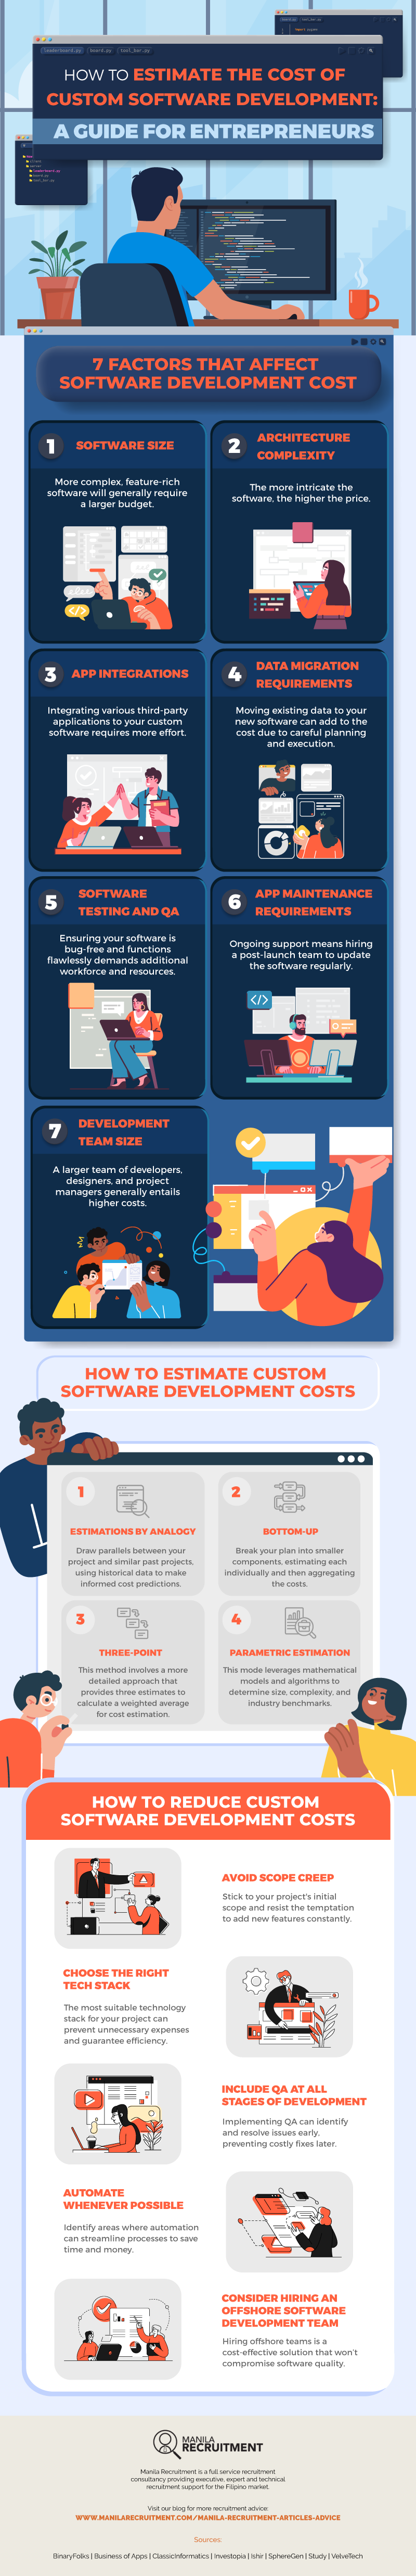 How to estimate the cost of custom software development infographic